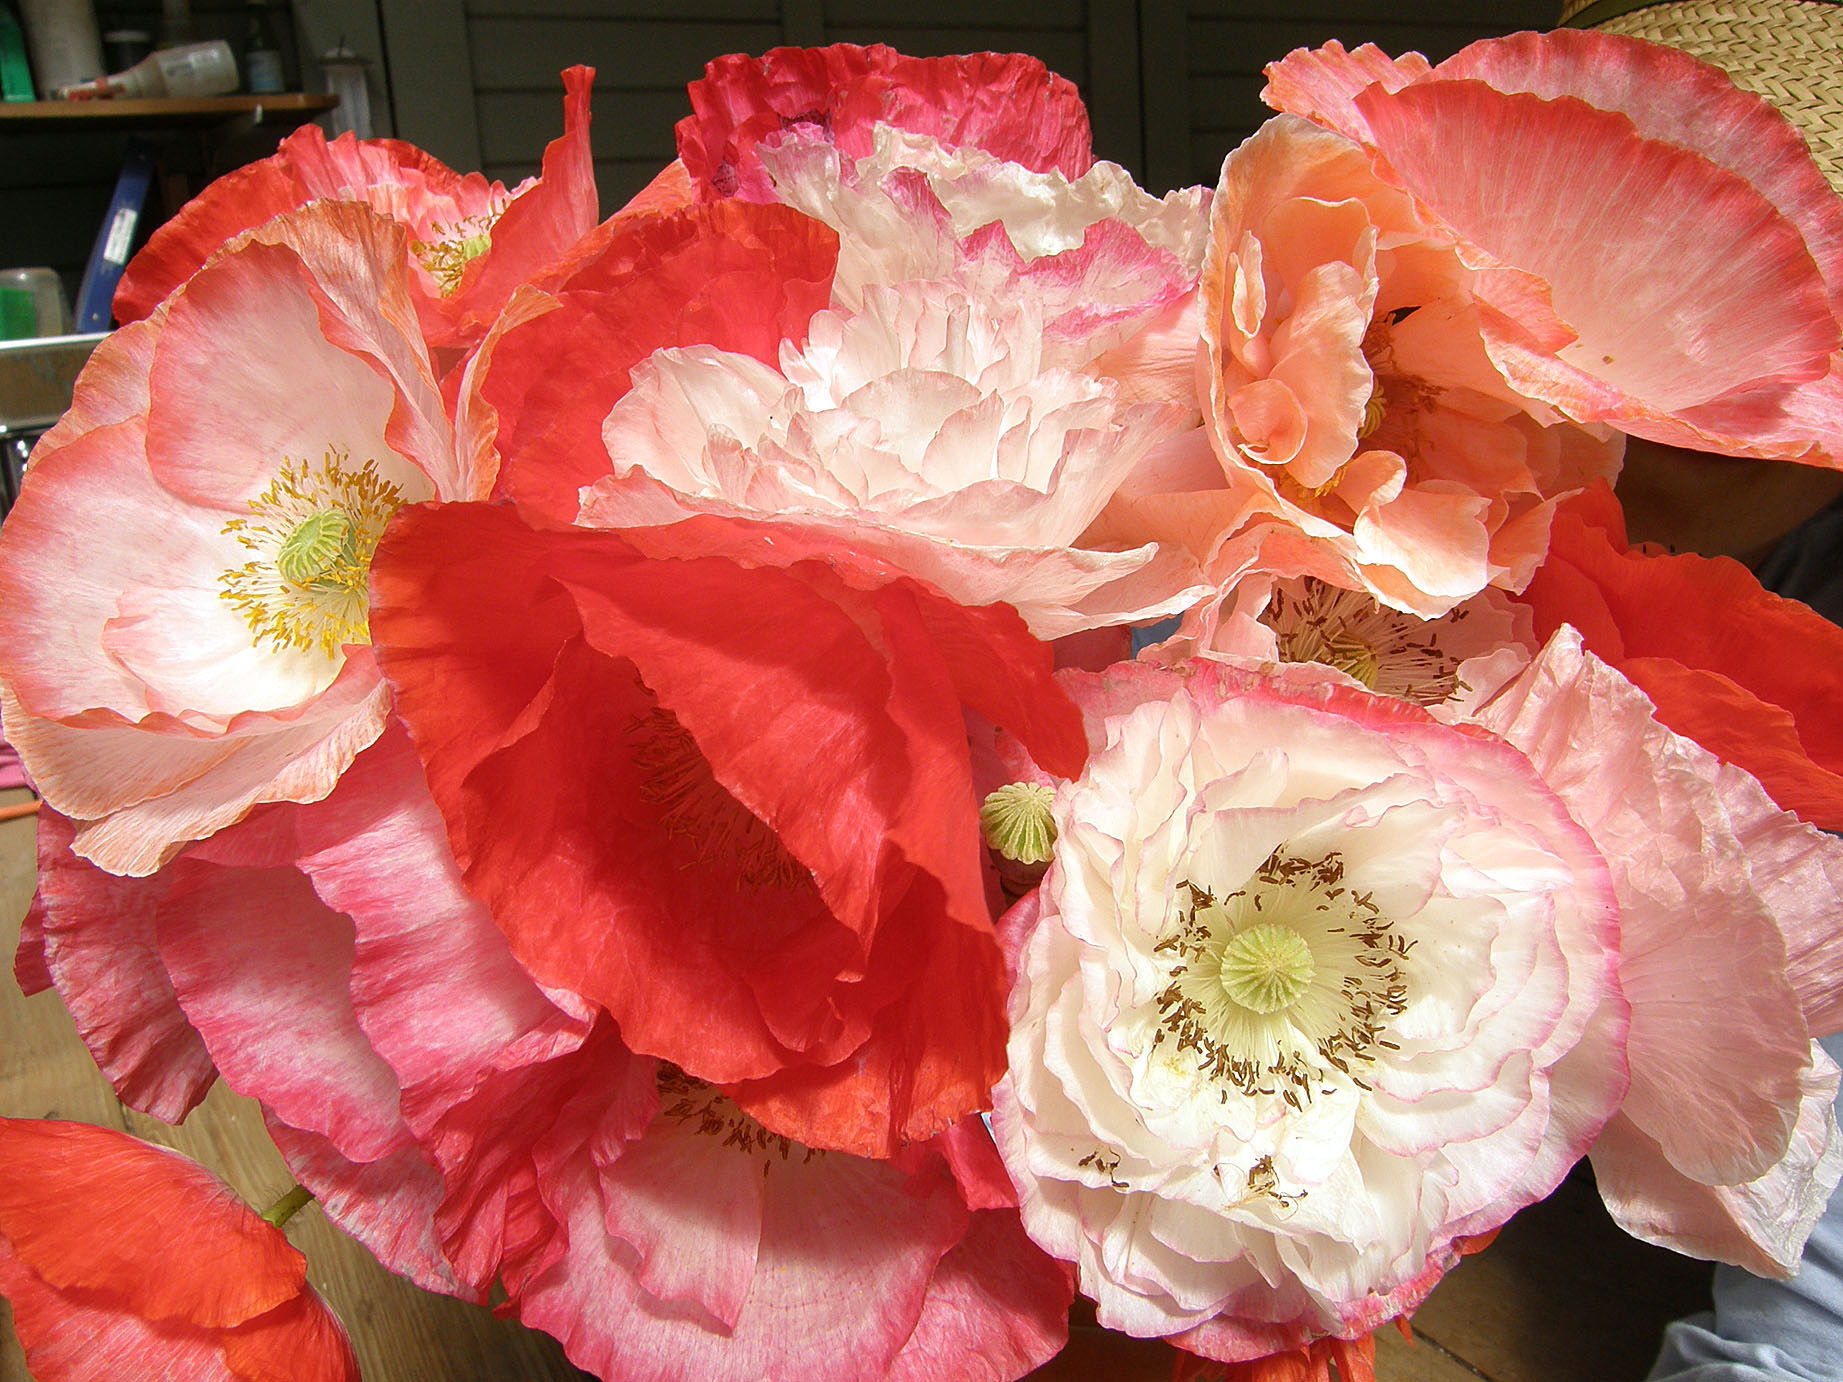 Shirley Poppy, “Falling in Love,” features attractive, delicately colored flowers.